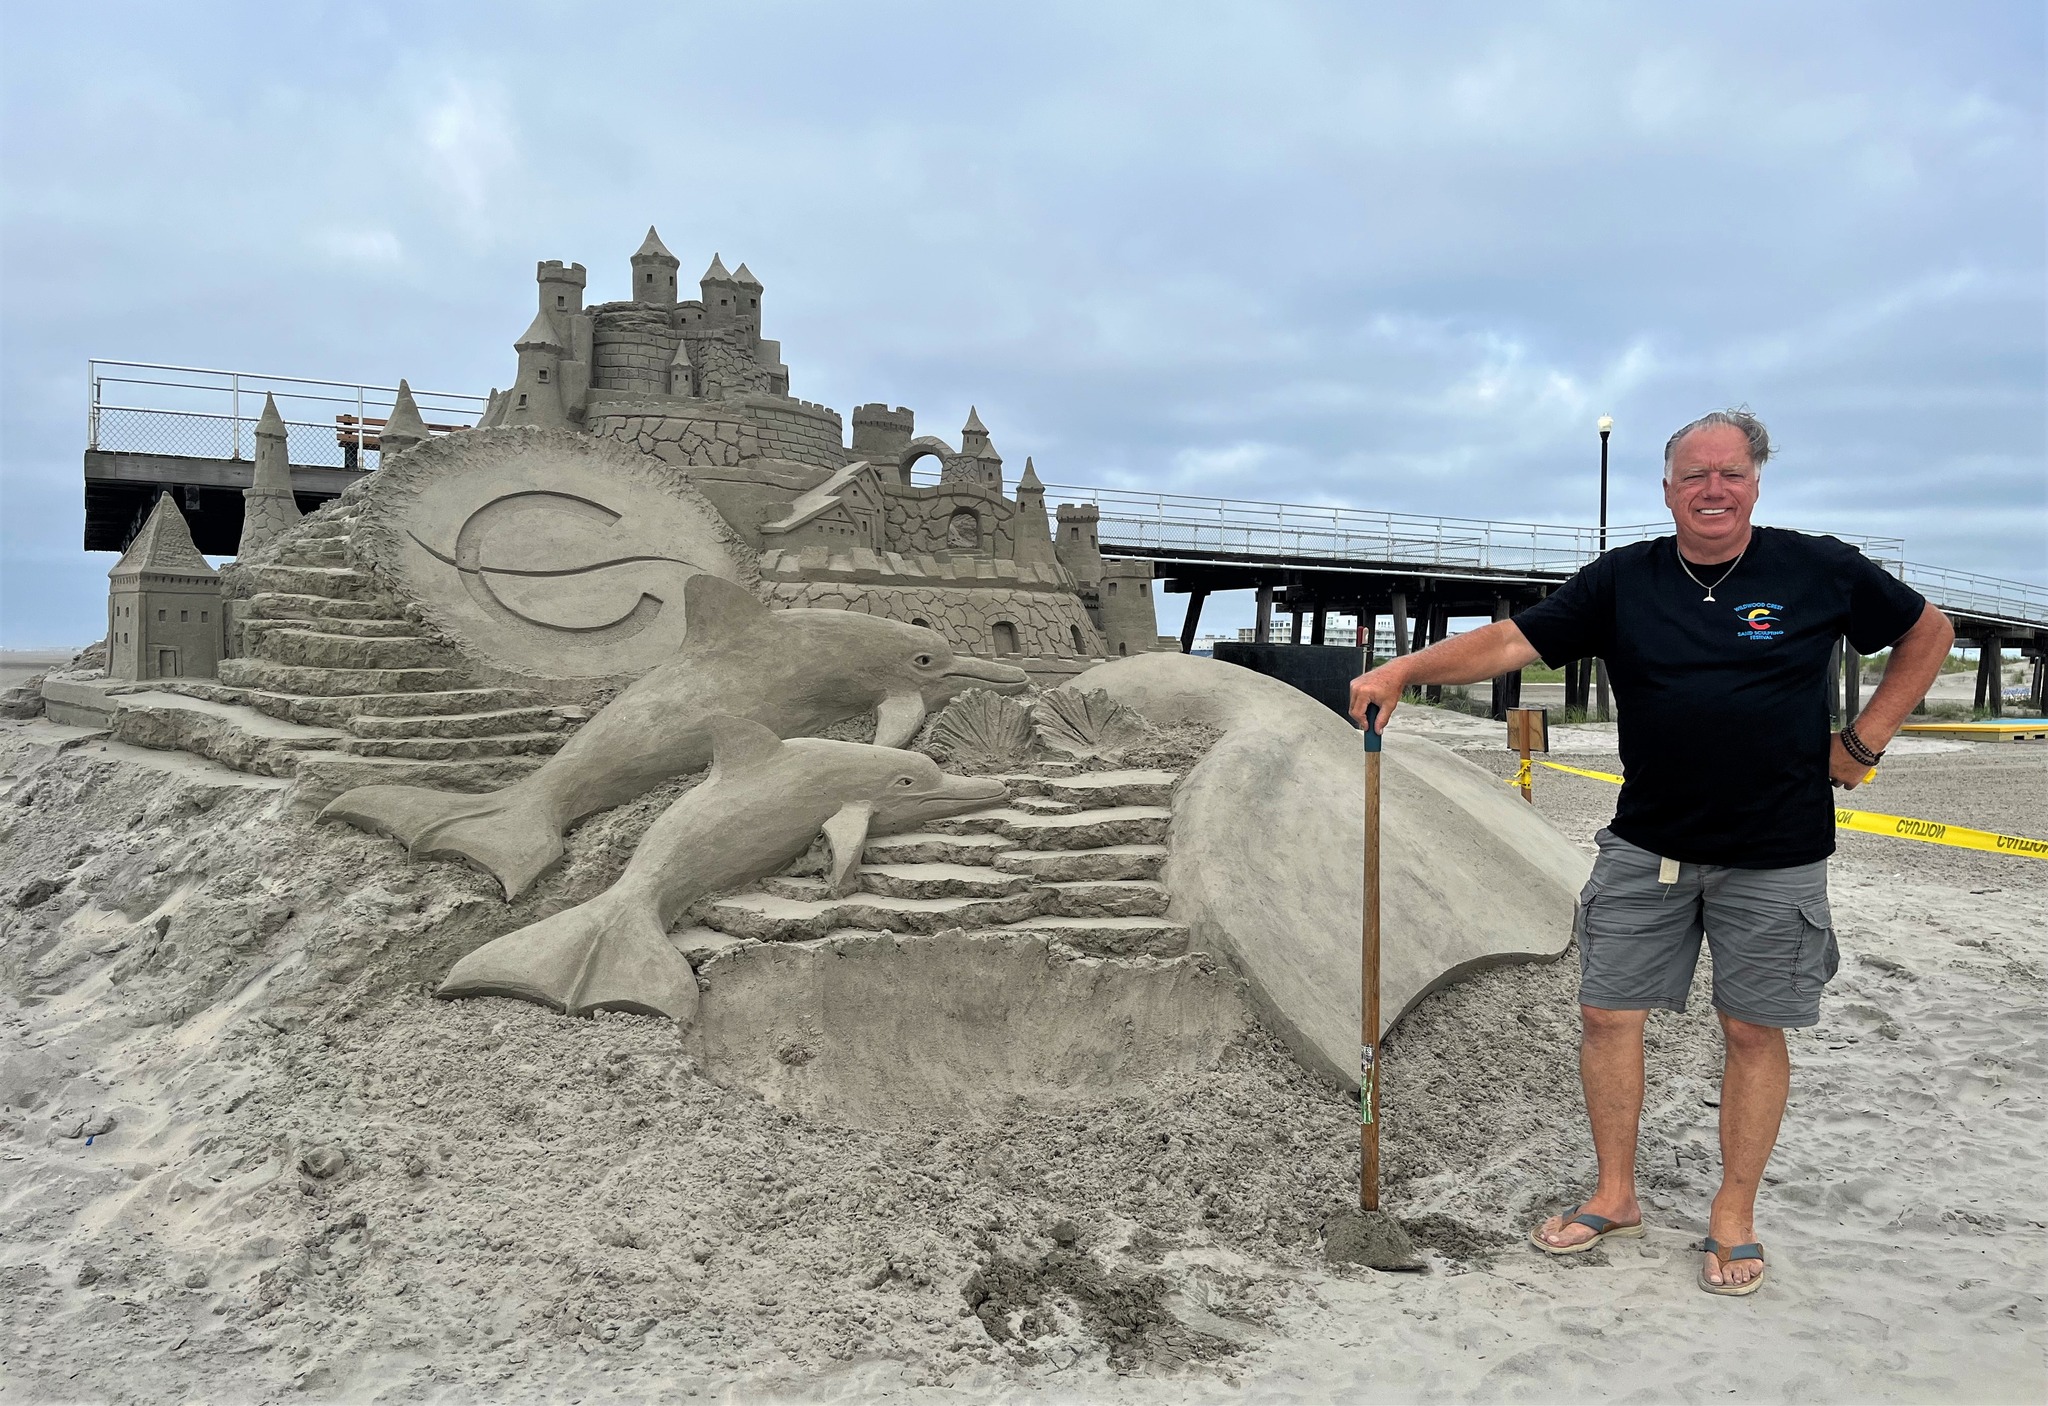 Wildwood 365 Wildwood Crest to host 11th annual Sand Sculpting